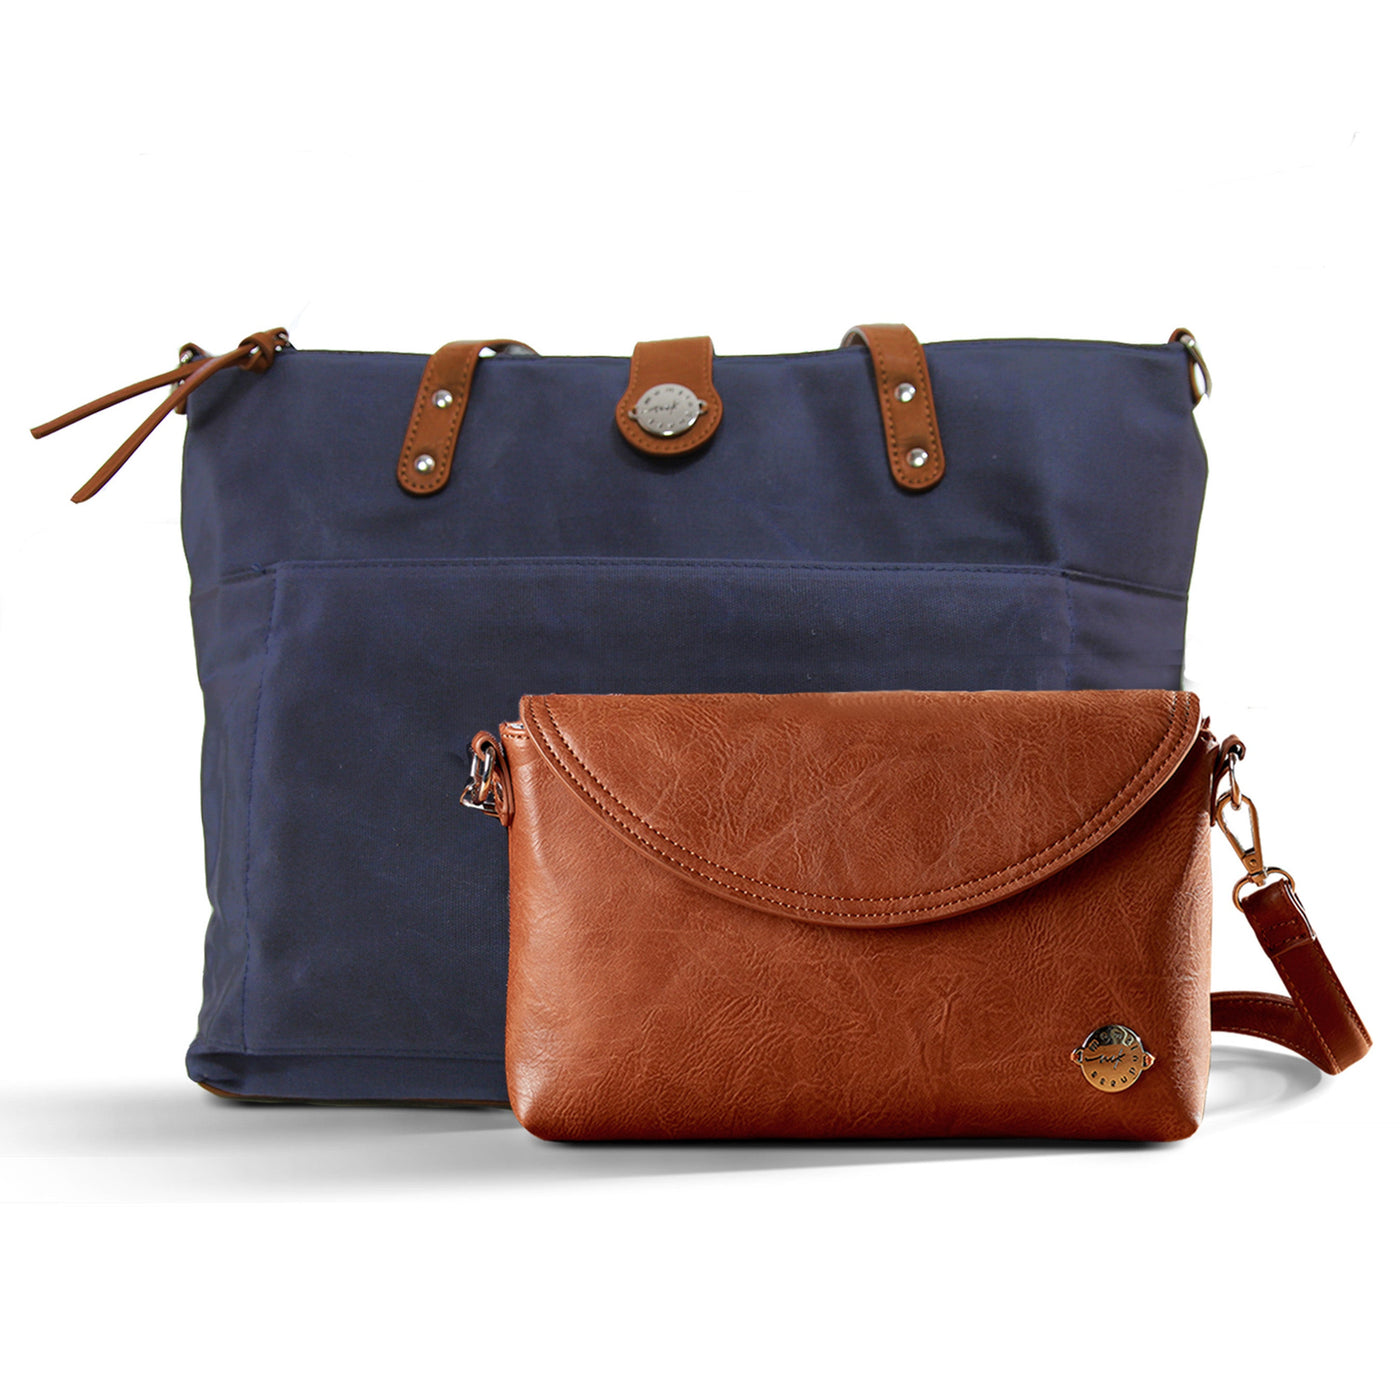 Navy blue waxed canvas tote bag with brown vegan leather accents and brown vegan leather diaper clutch, all on a white background.